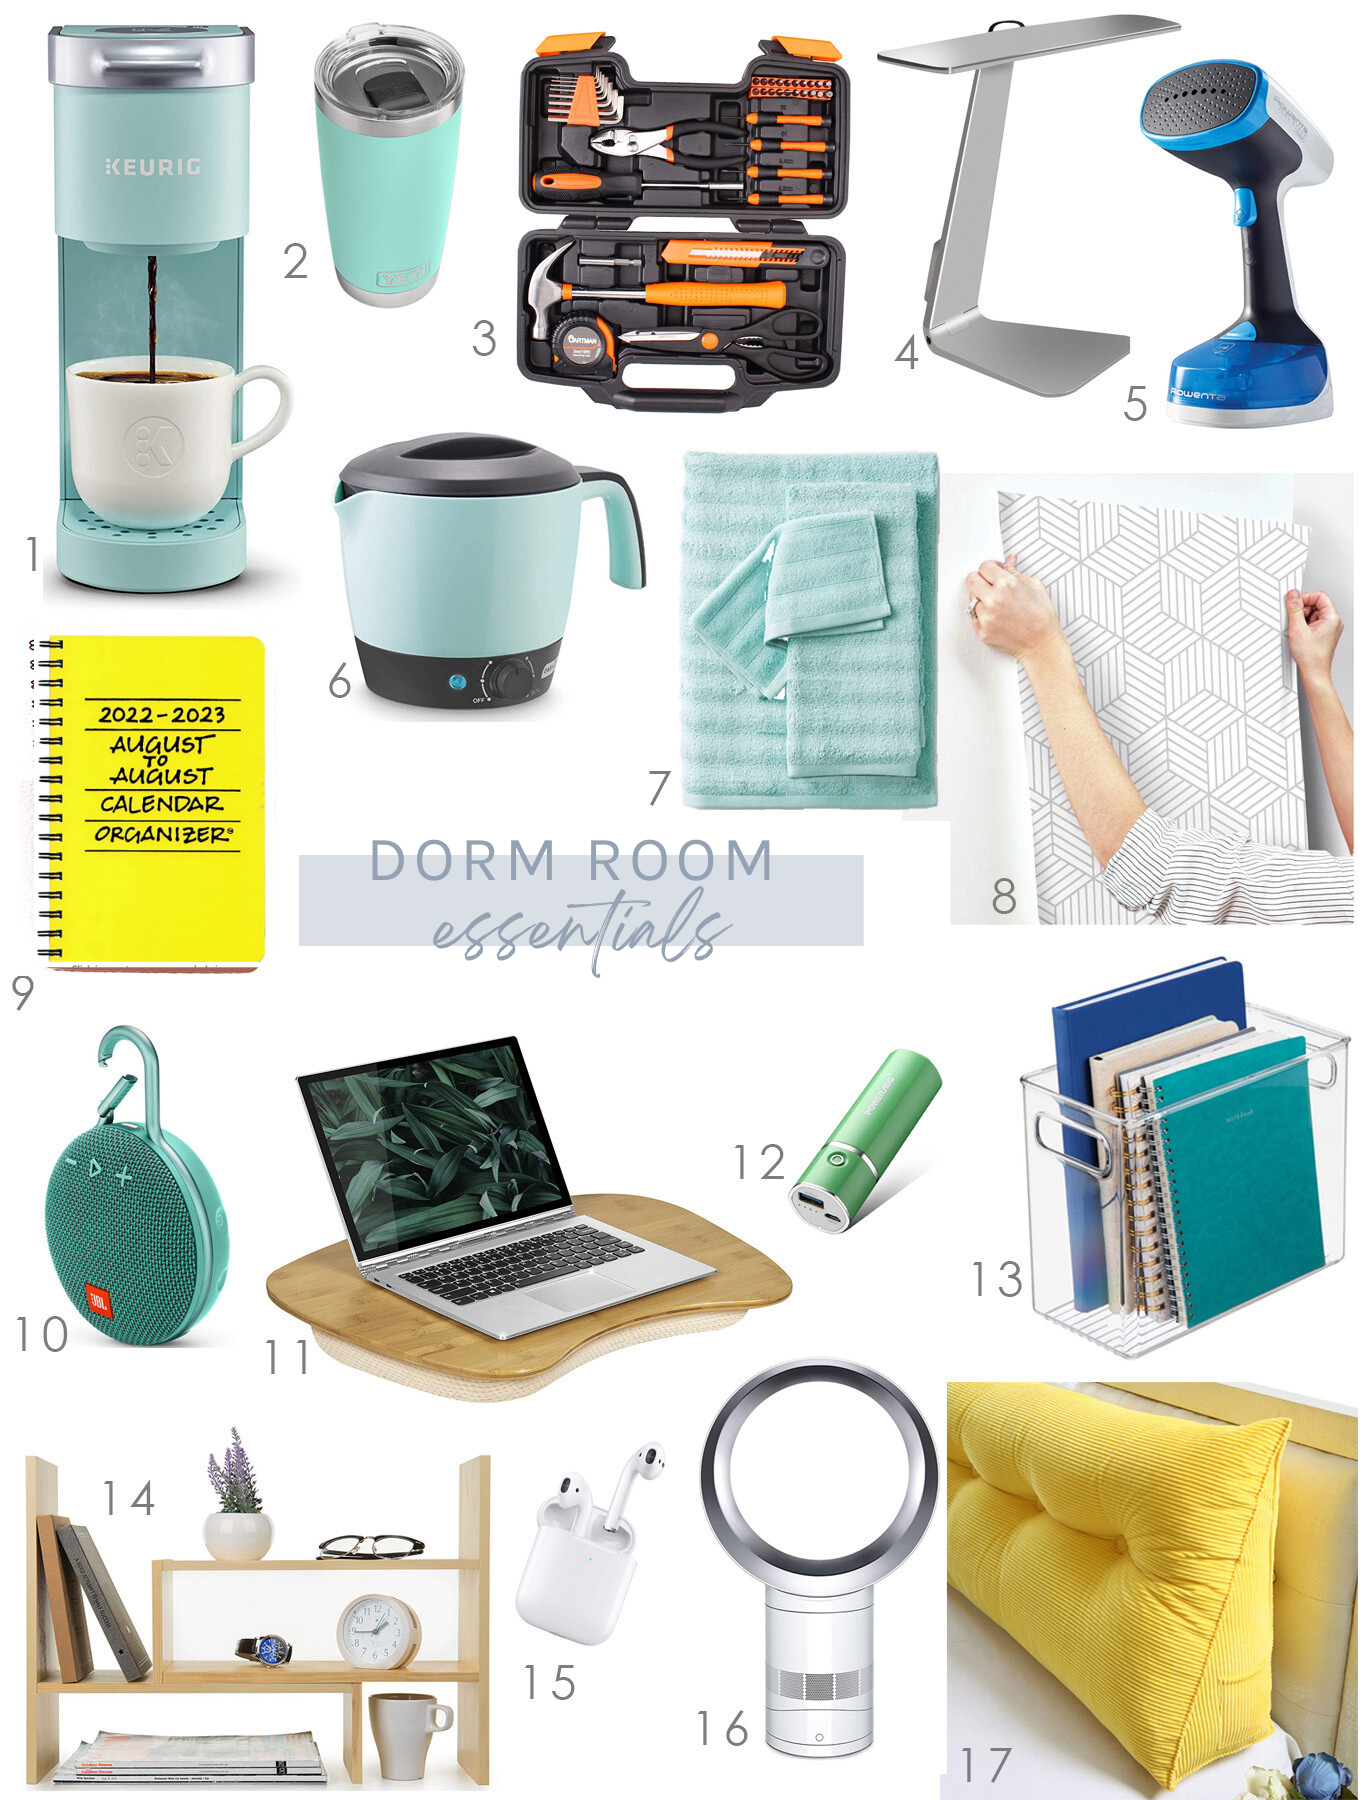 Getting your College Student ready for Dorm Life? Download the Free Dorm Room Essentials Checklist and have everything they need for a great school year!